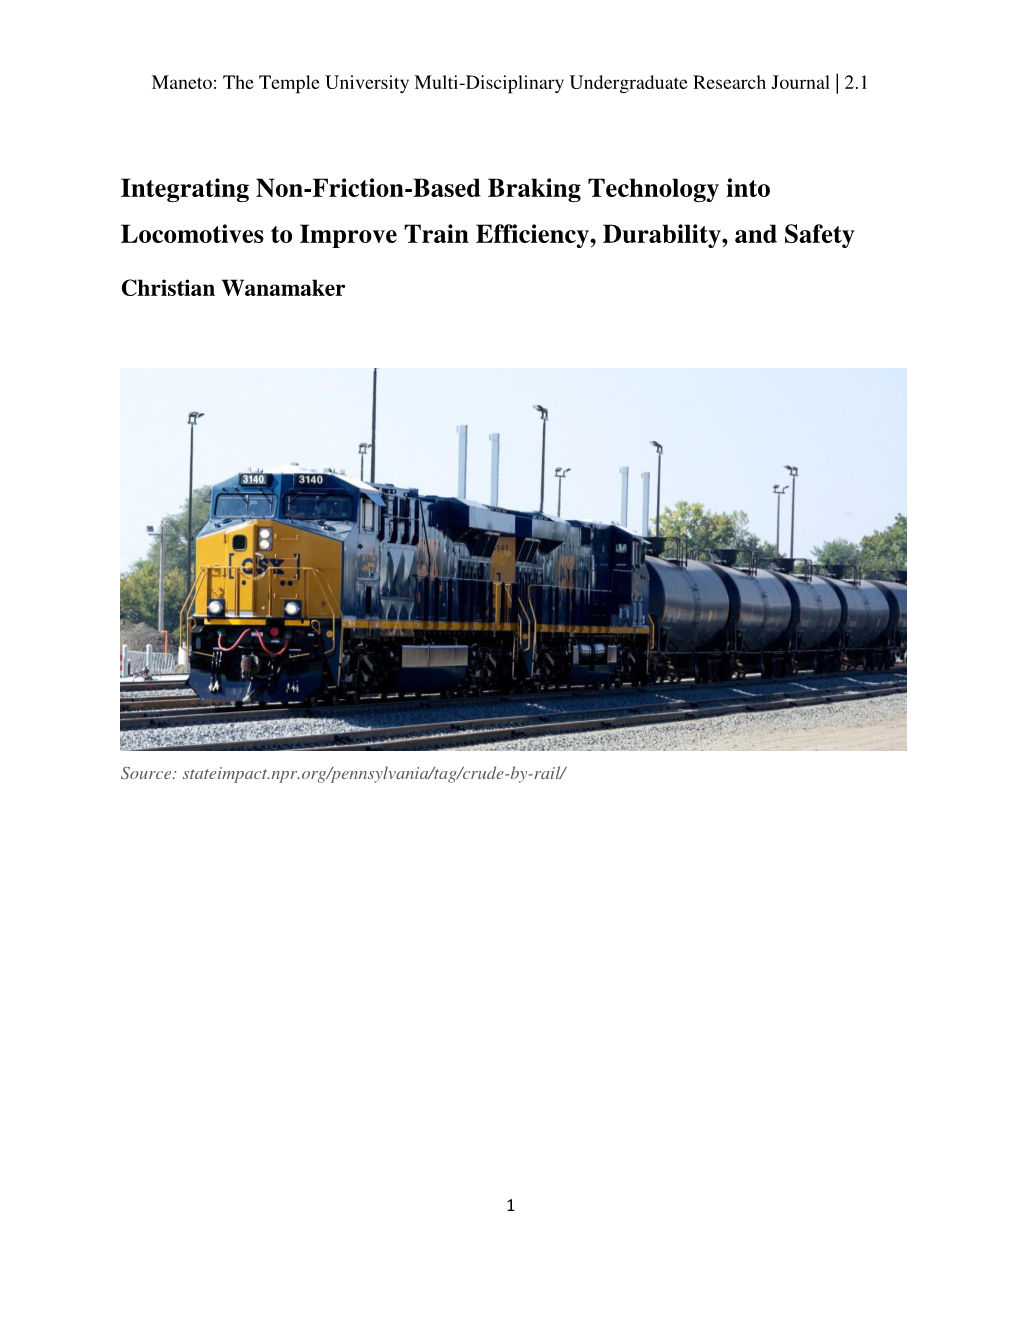 Integrating Non-Friction-Based Braking Technology Into Locomotives to Improve Train Efficiency, Durability, and Safety